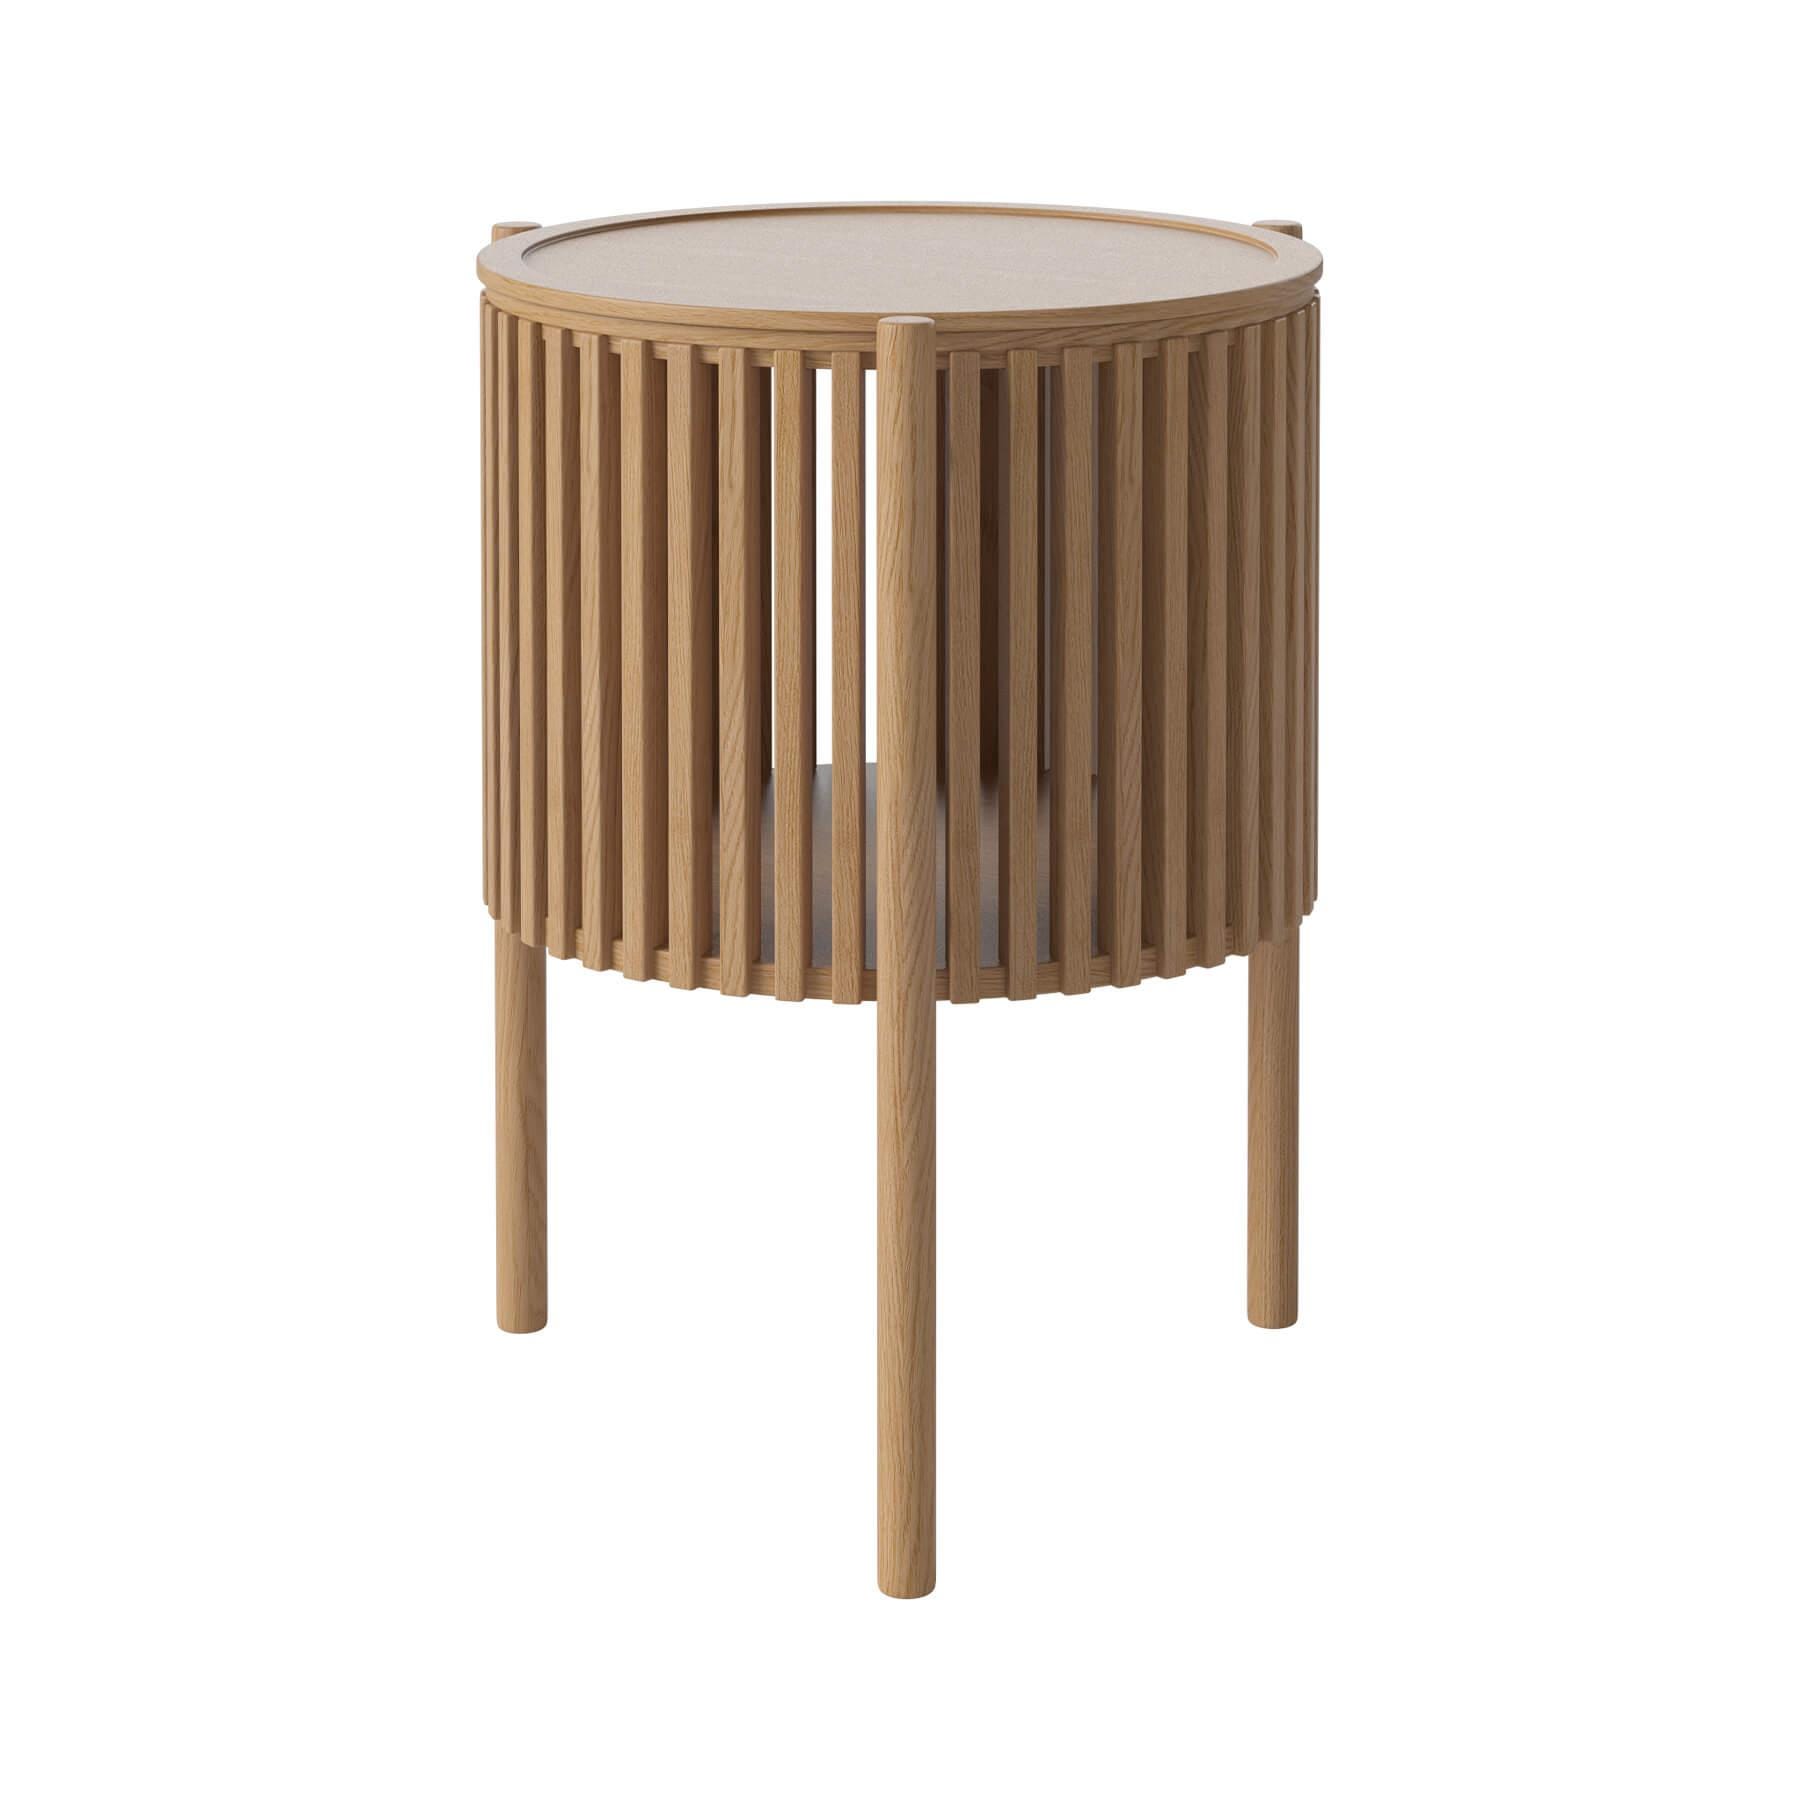 Bolia Story Side Table Oiled Oak Light Wood Designer Furniture From Holloways Of Ludlow